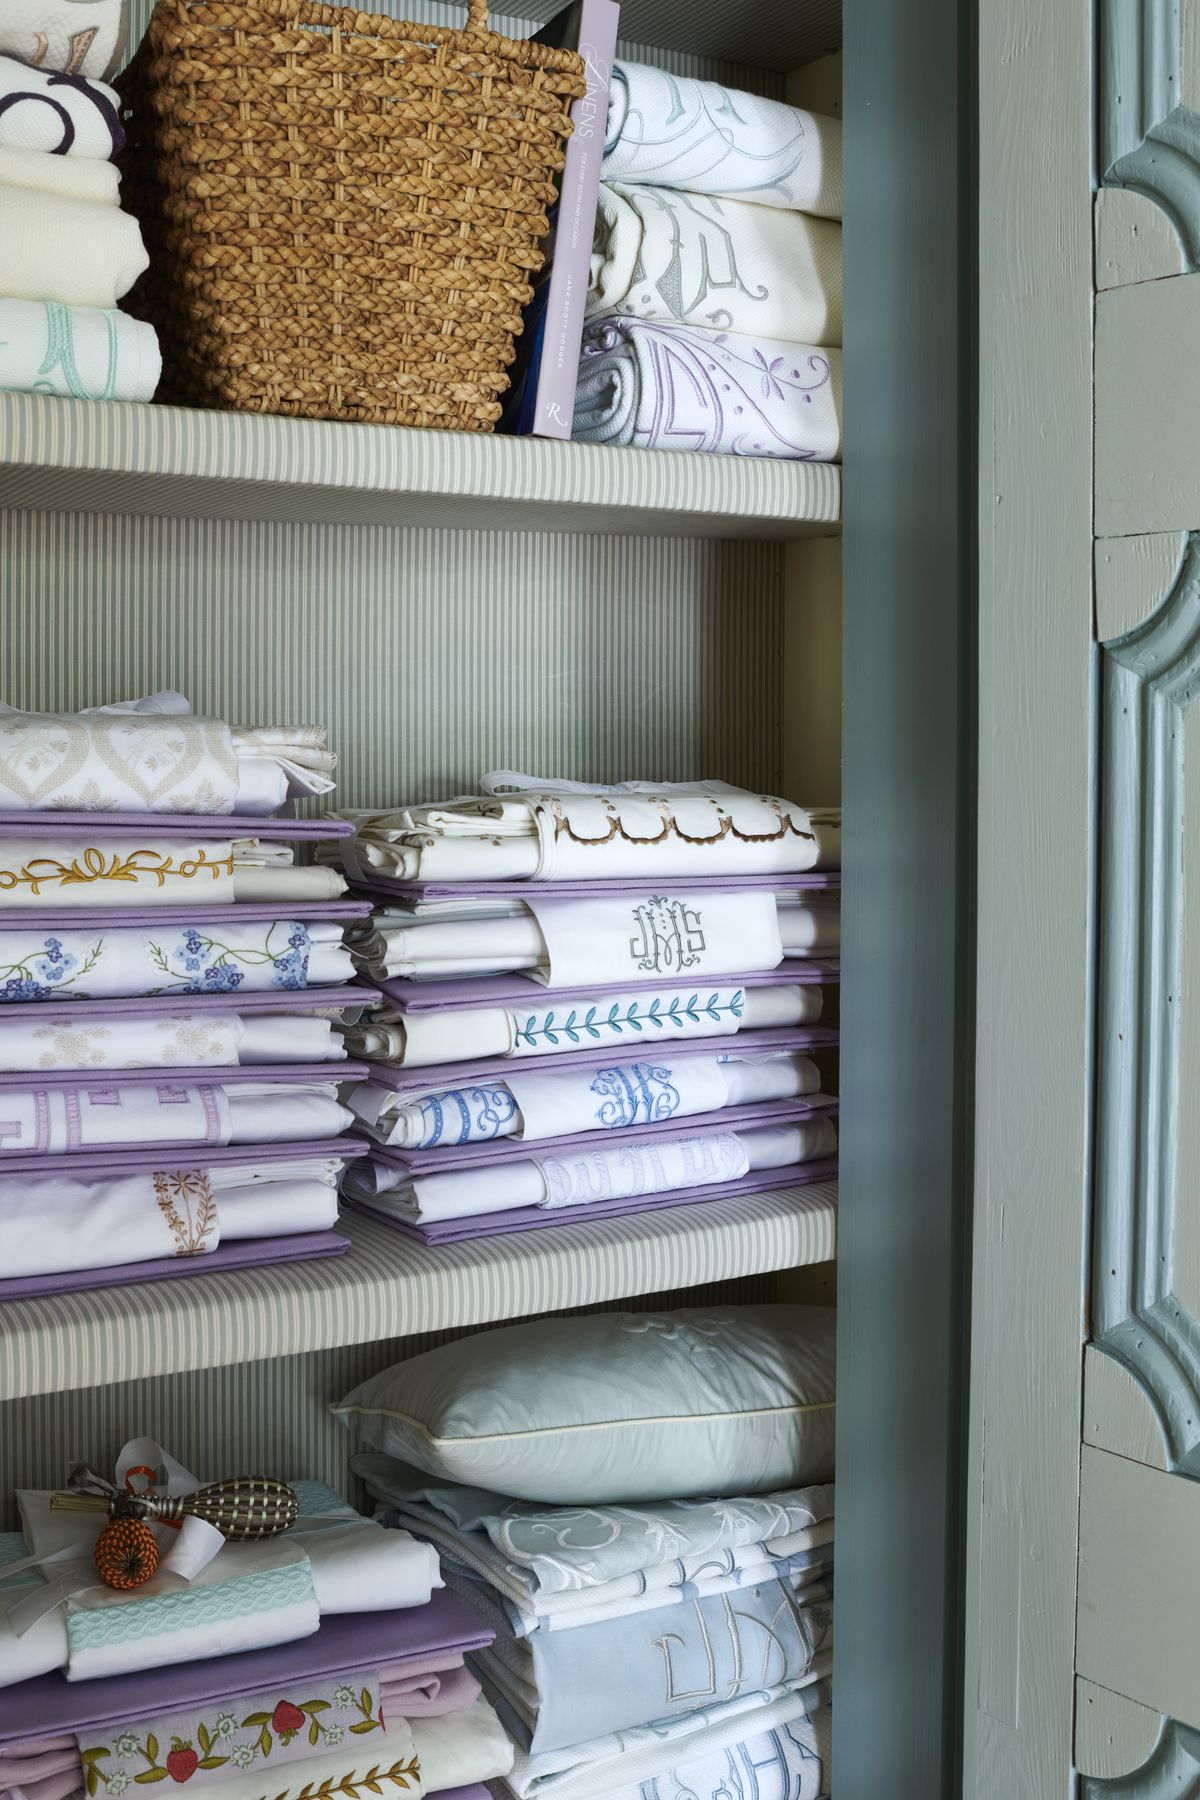 a closet in the bedroom’ entry vestibule holds hodges largest cache of exquisitely organized bedding and after a good ironing a matching flat sheet and pillow sham are folded to display their embroidery then tied to a linen board